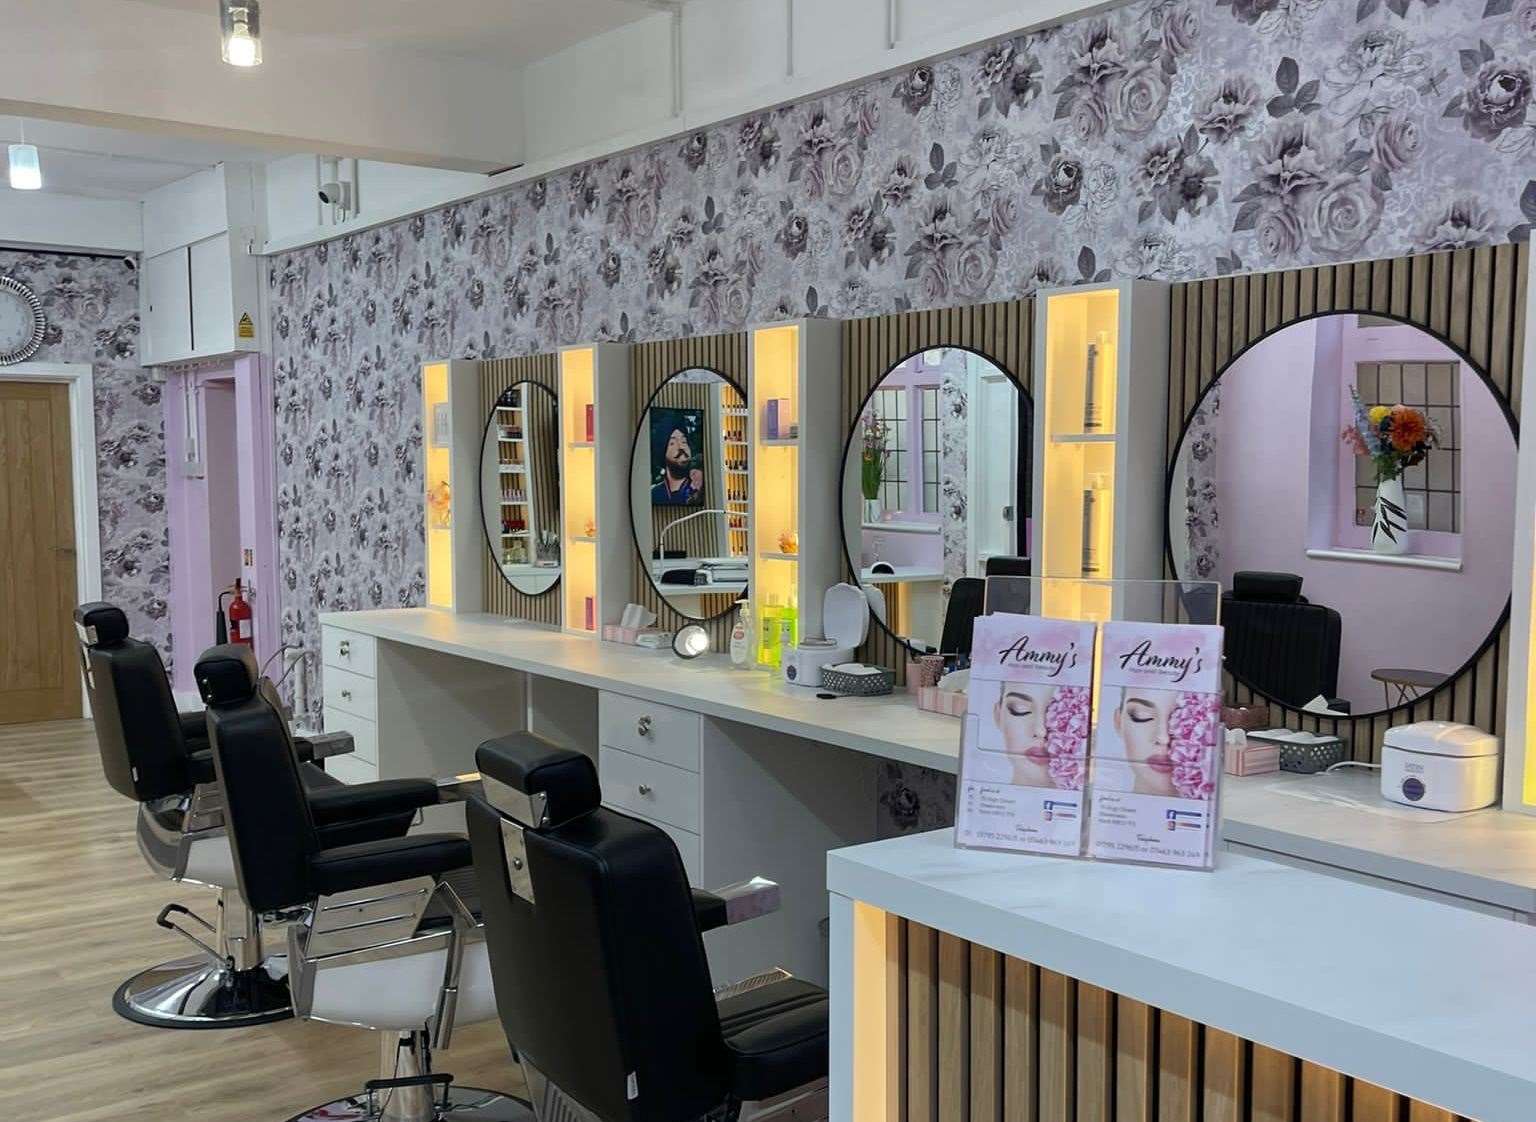 Ammy's Hair and Beauty offers a range of beauty treatments. Picture: Love Kaur